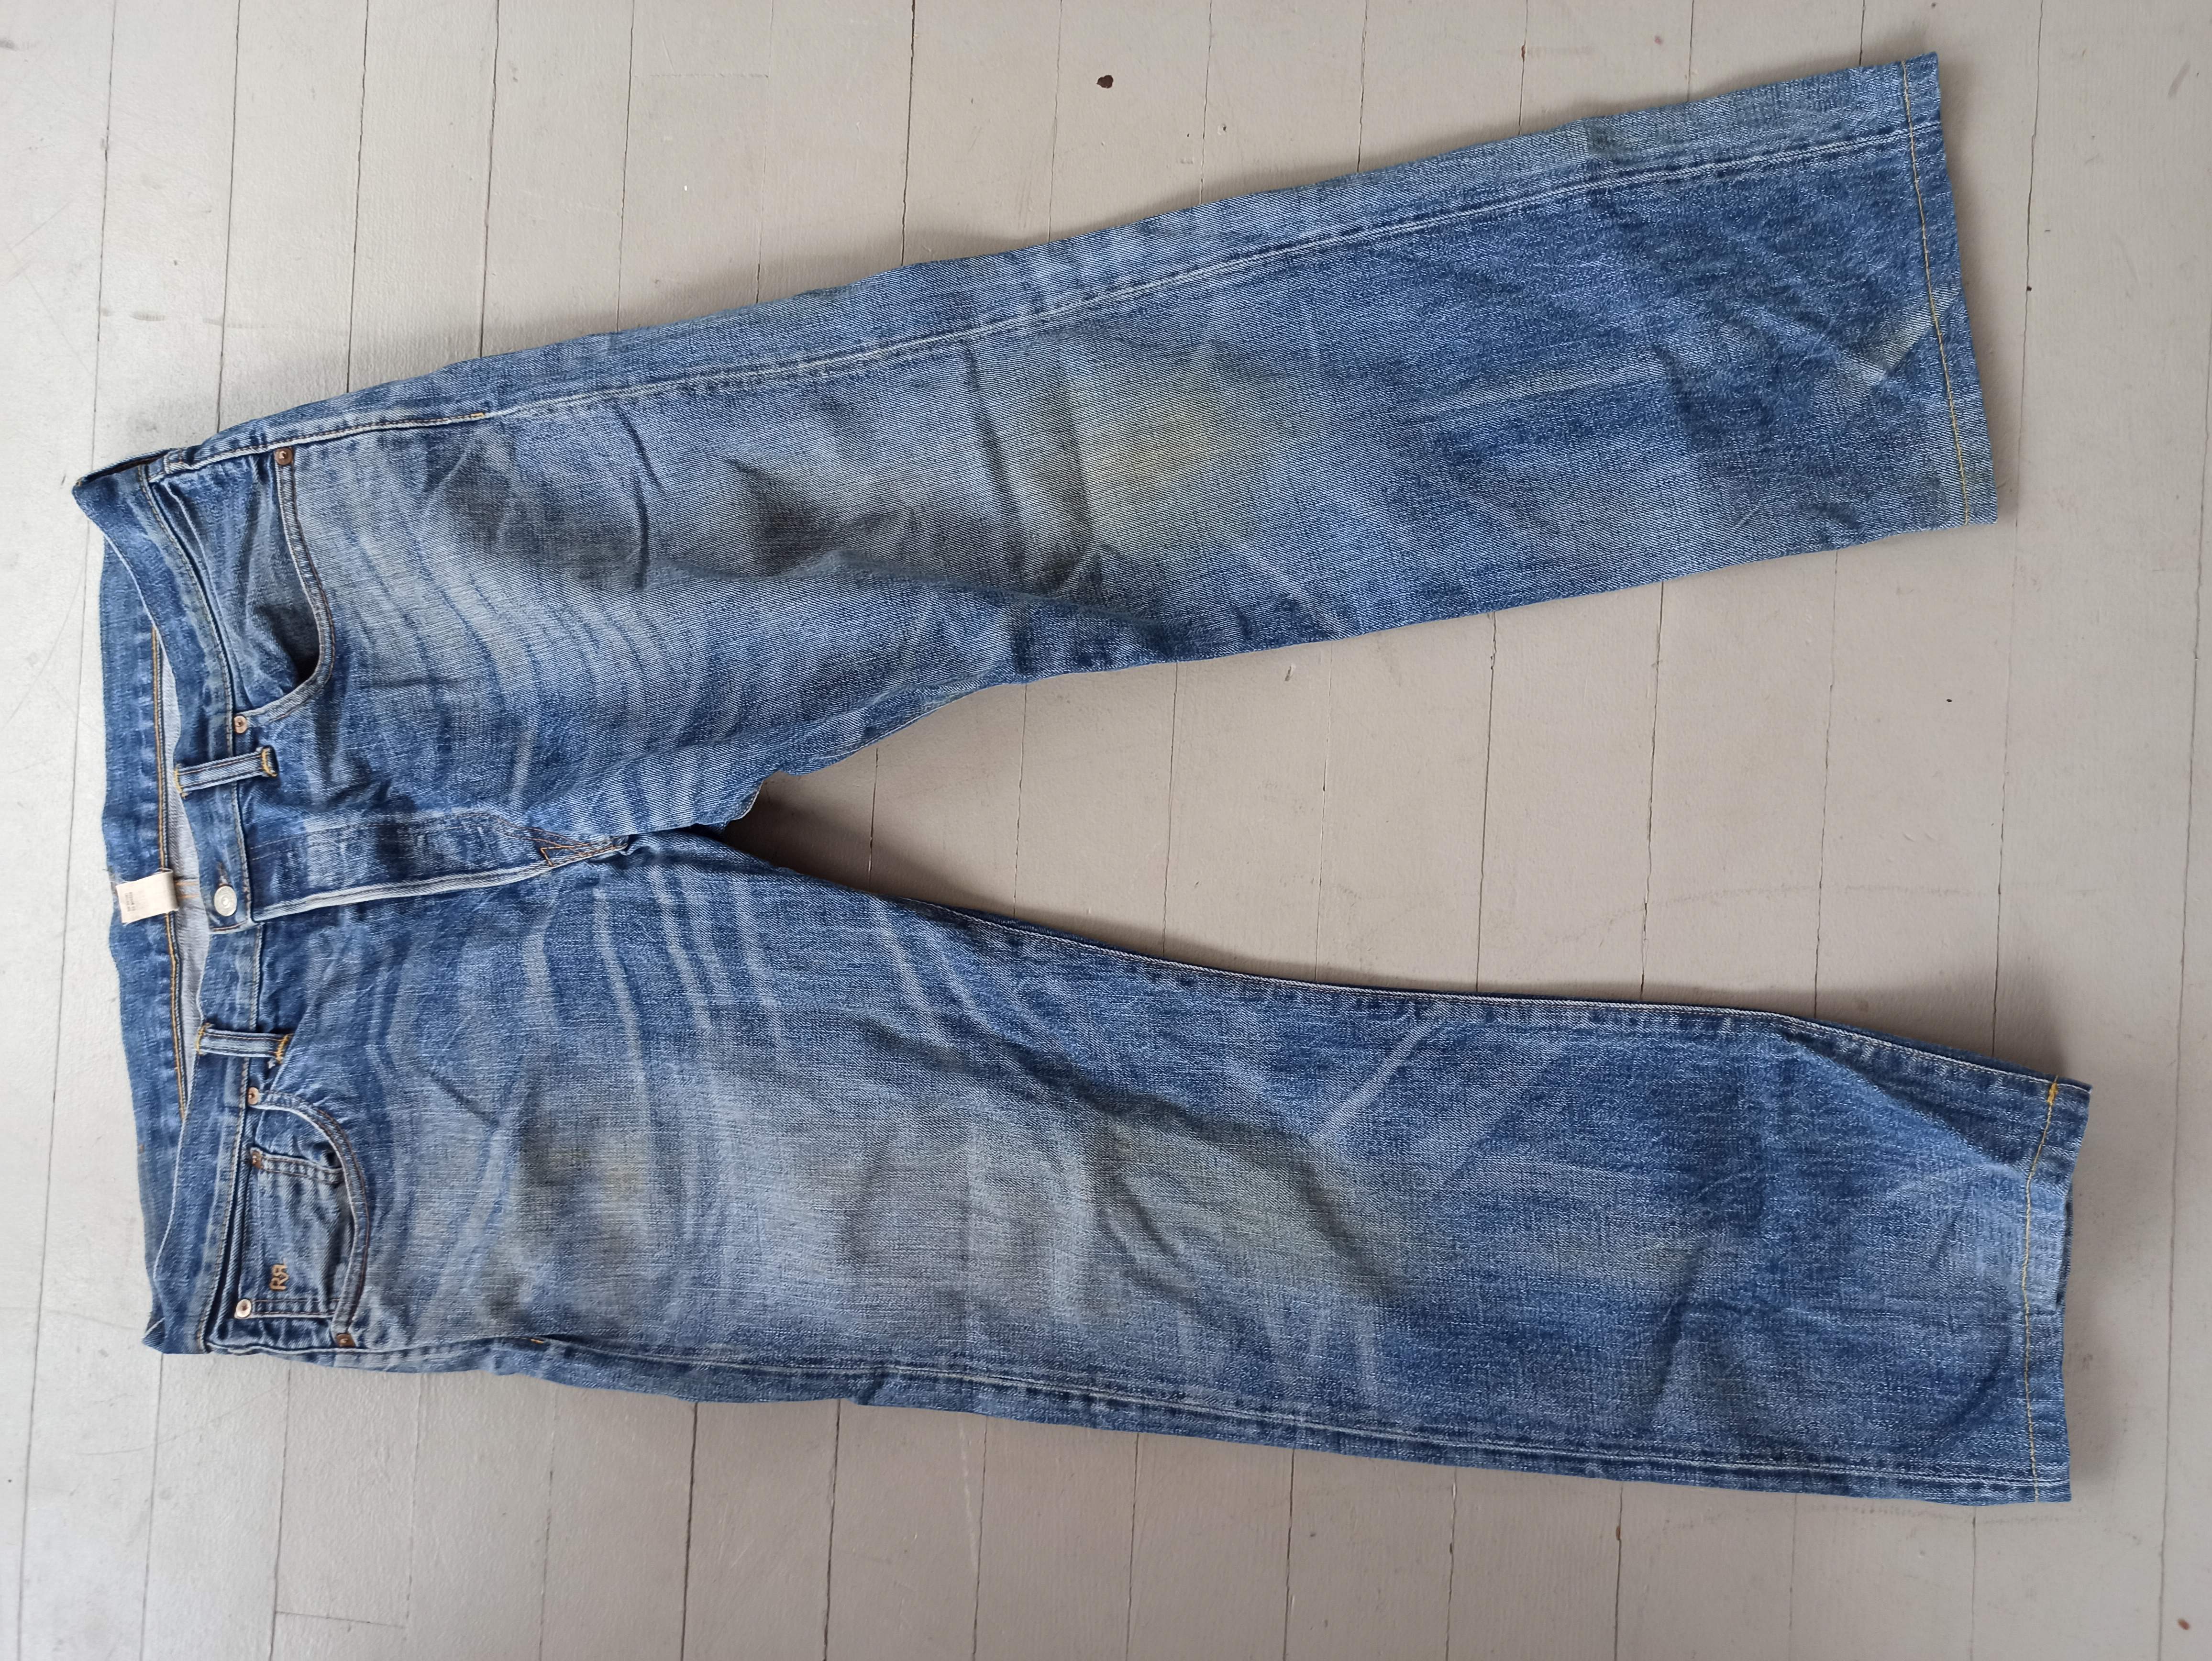 RRL distressed jeans. Size 38 waist hemmed to 29